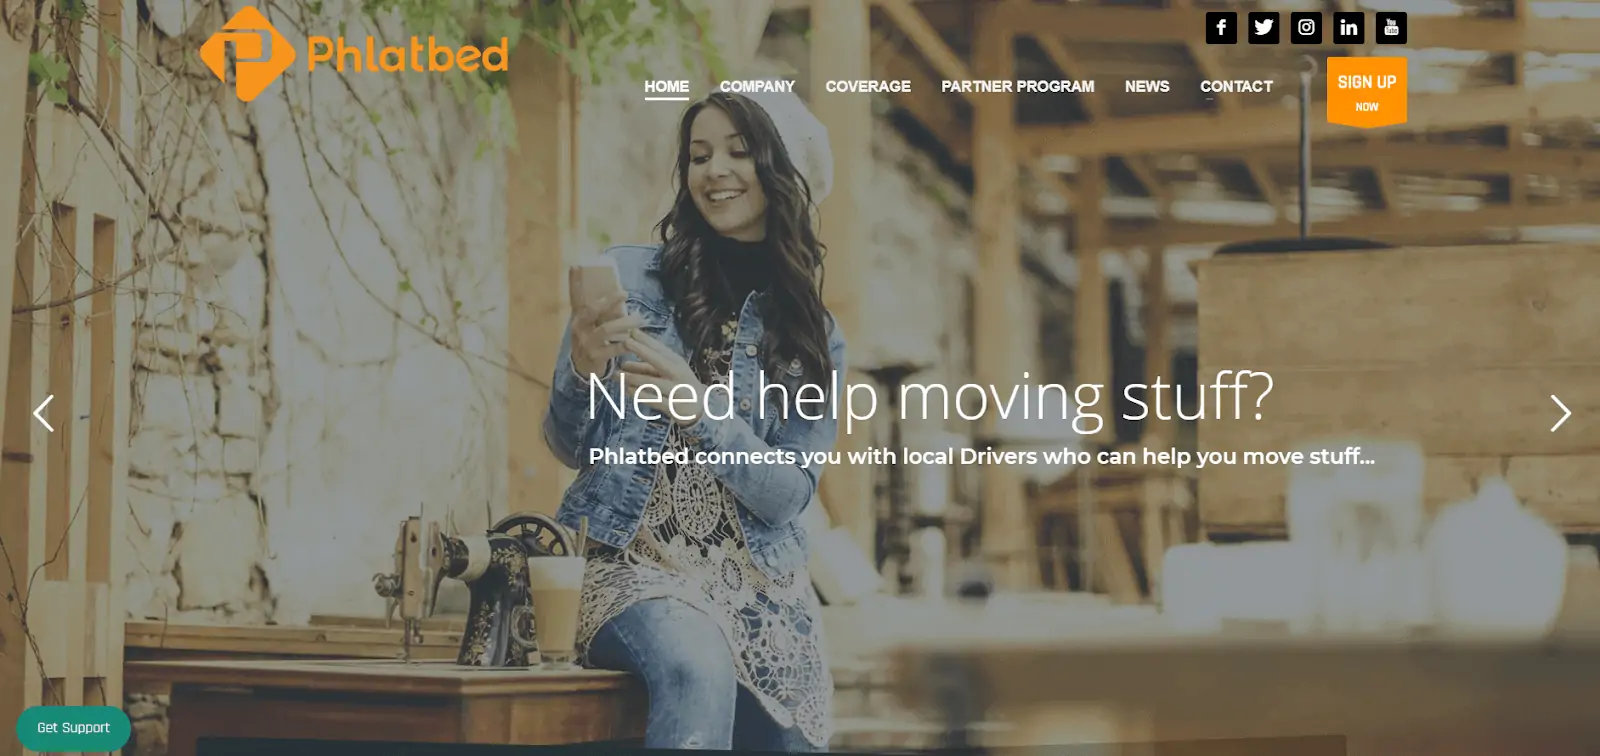 Uber for moving: Phlatbed homepage